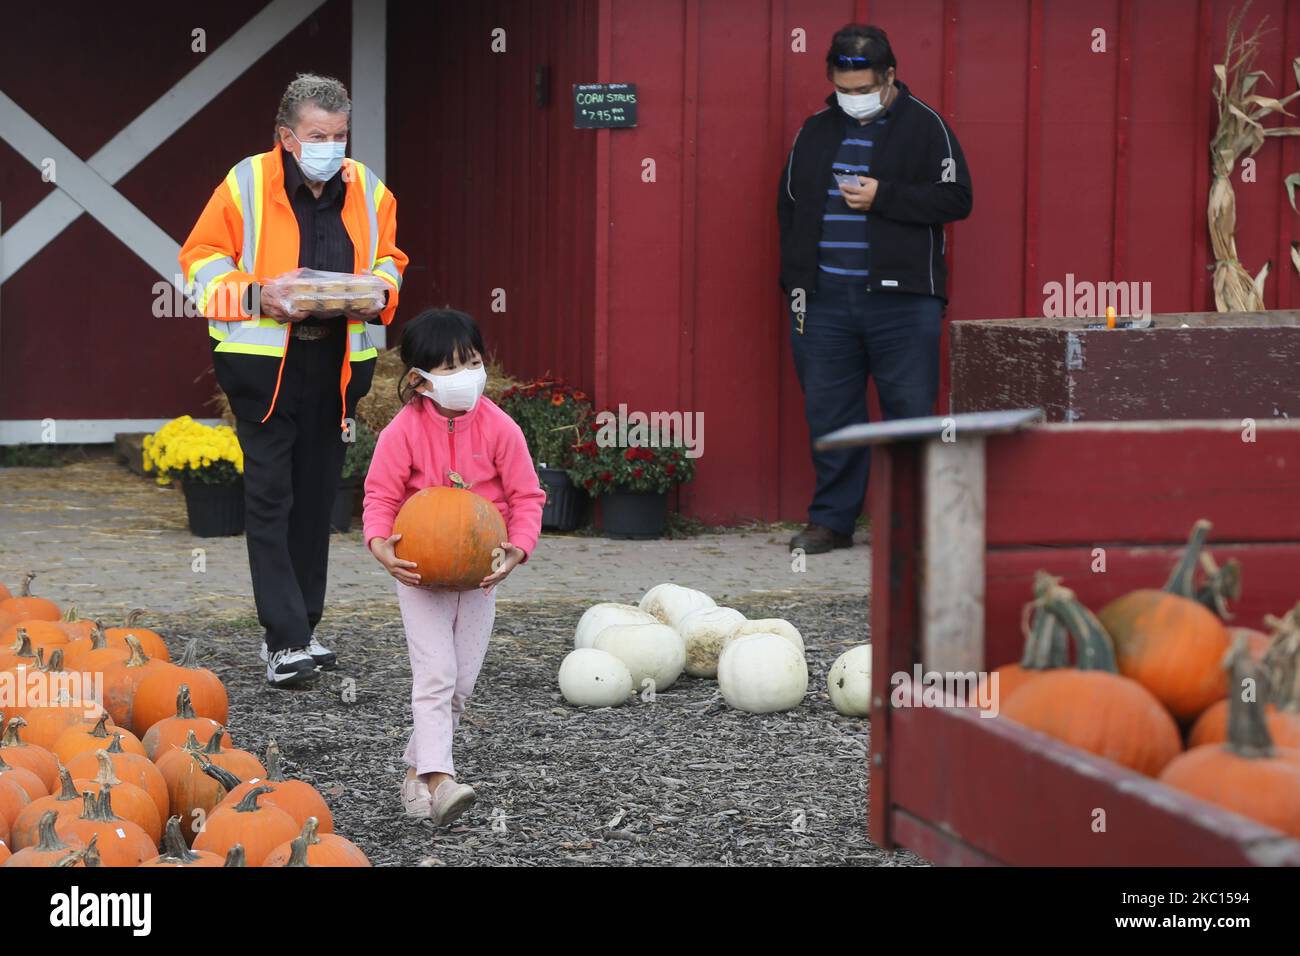 People wearing face masks to protect them from the novel coronavirus (COVID-19) while selecting pumpkins for Thanksgiving and Halloween at a farm in Markham, Ontario, Canada, on October 03, 2020. Cases of COVID-19 continue to rise, with record daily numbers across the Greater Toronto Area. Calls to place the city of Toronto back into lockdown to slow the spread of the virus are mounting from healthcare officials. (Photo by Creative Touch Imaging Ltd./NurPhoto) Stock Photo